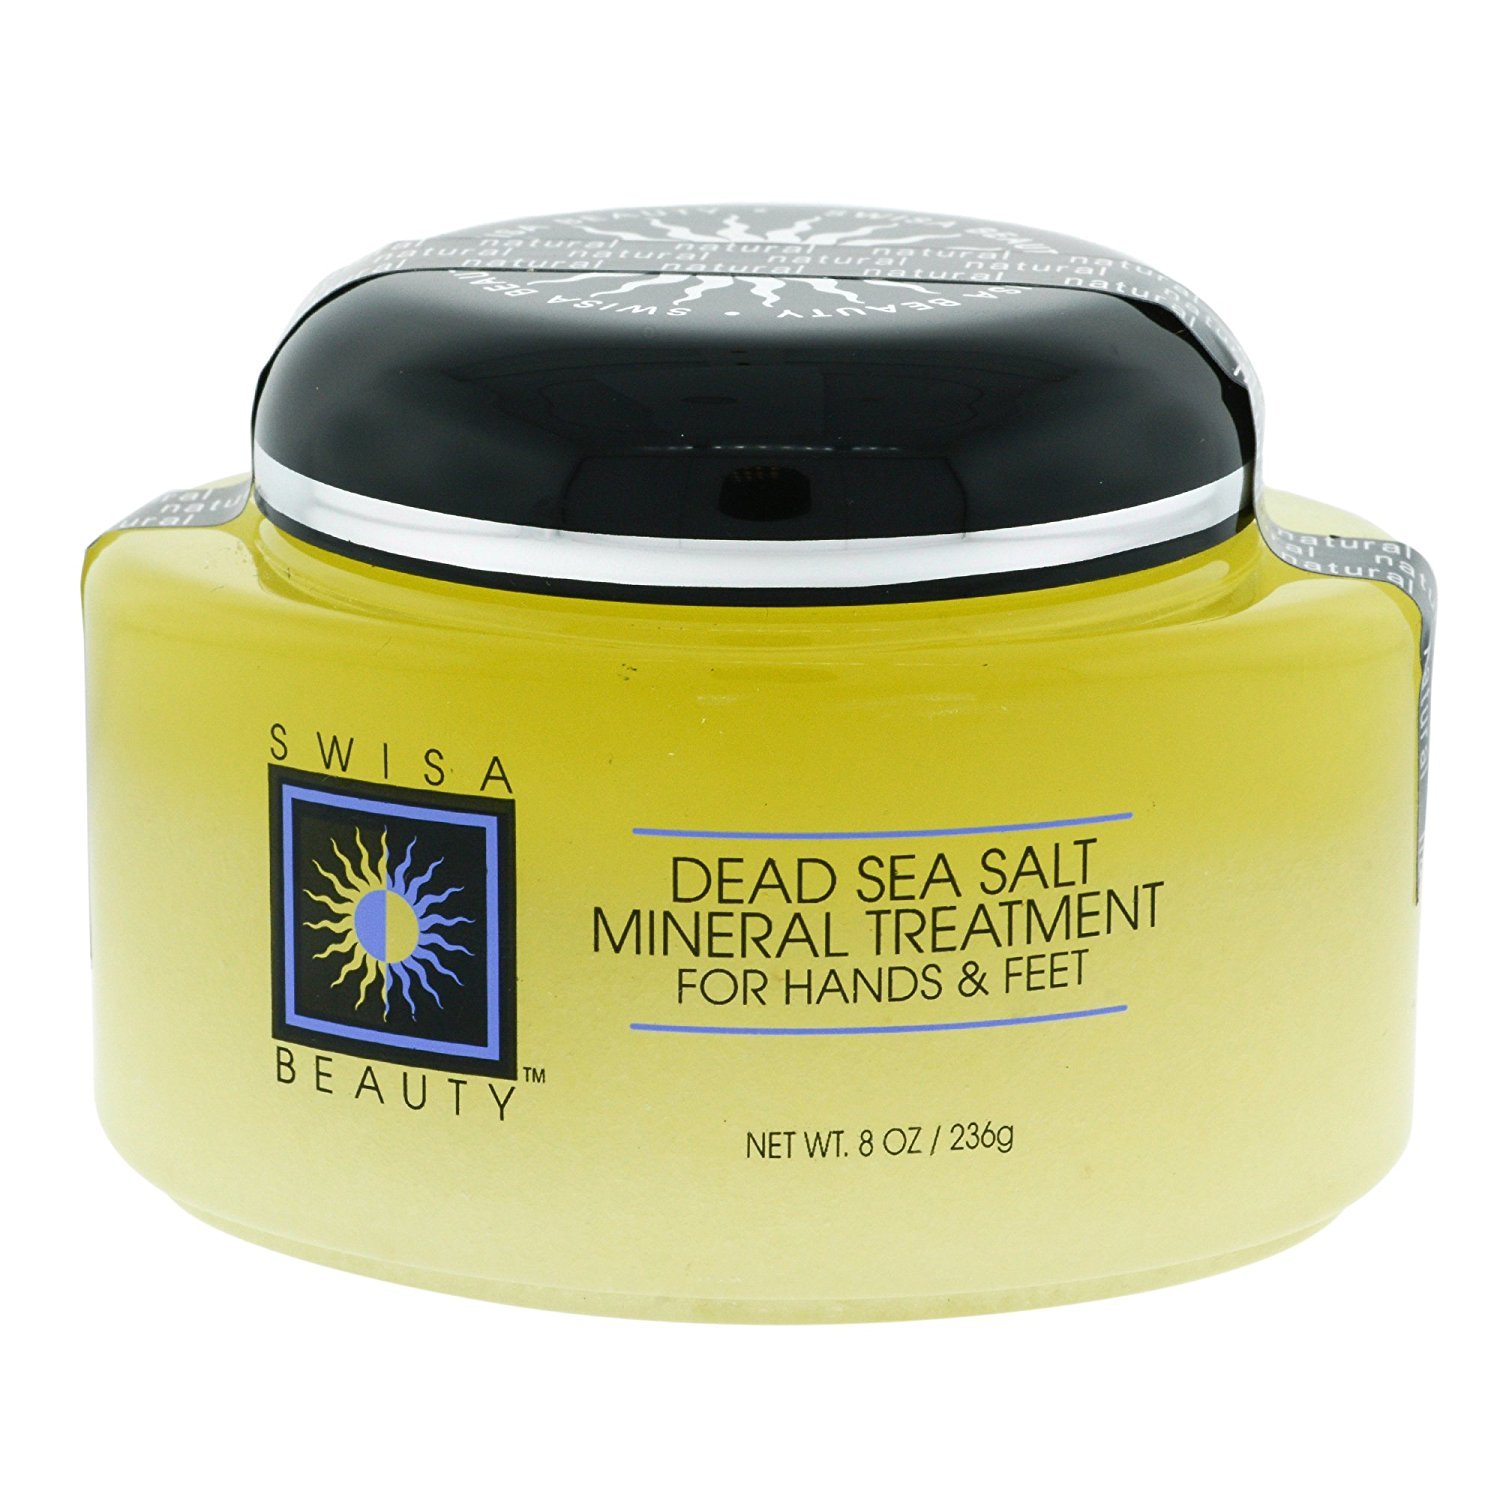 Swisa Beauty Dead Sea Salt Mineral Treatment - Body Scrubs For Hands, Elbows, Knees, and Feet.